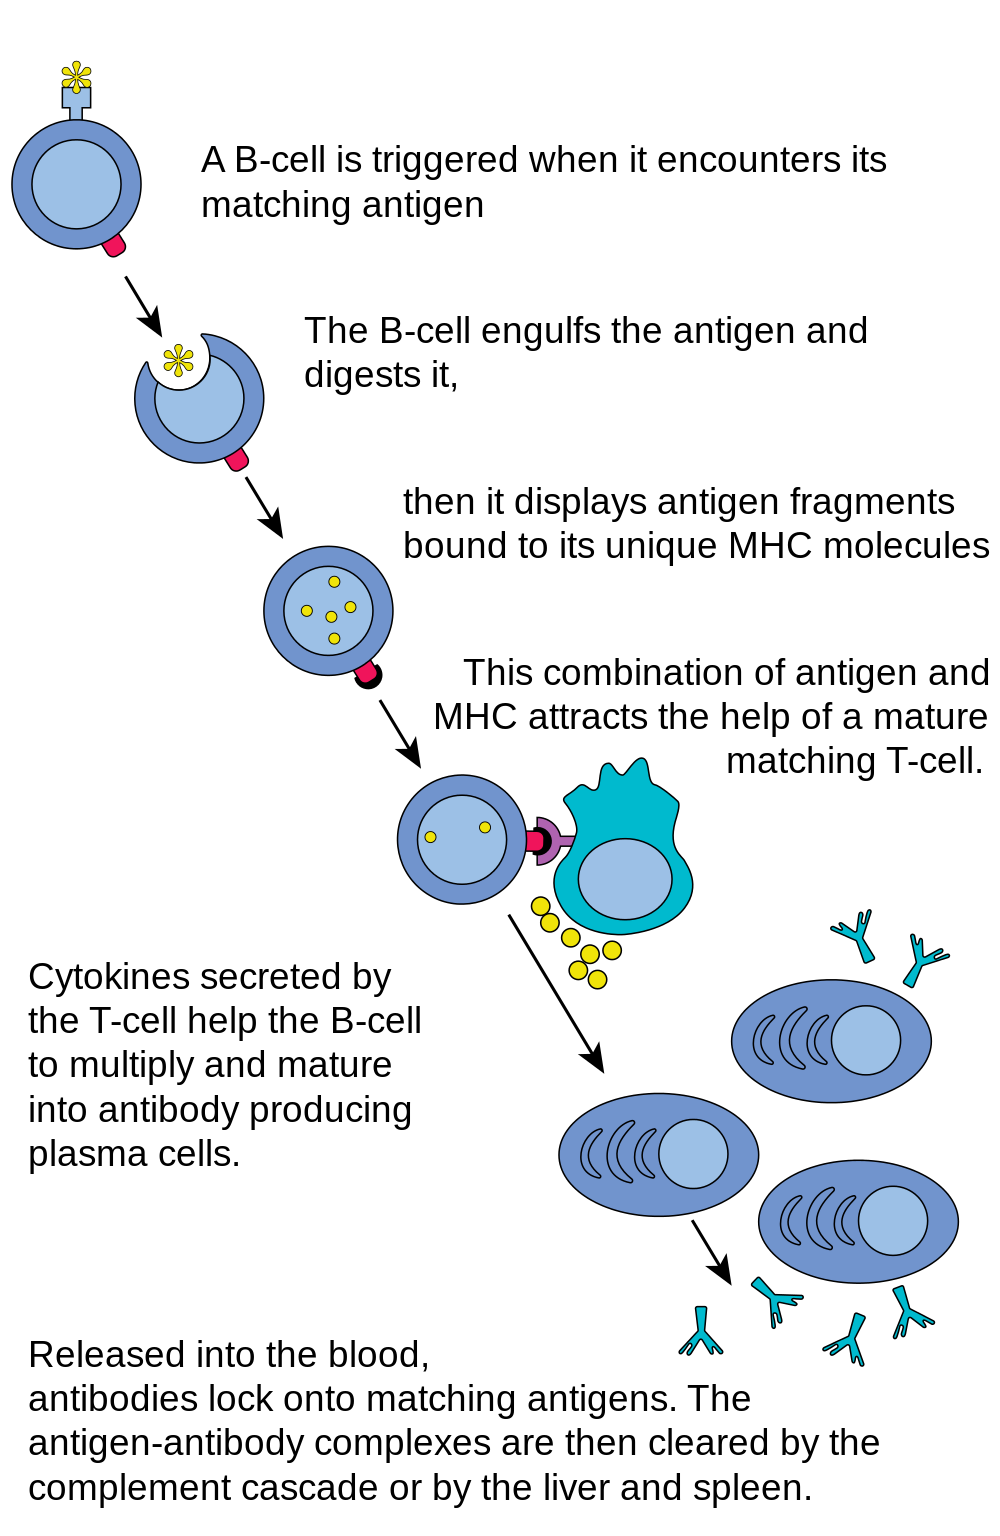 17.5.4 B Cell Activation